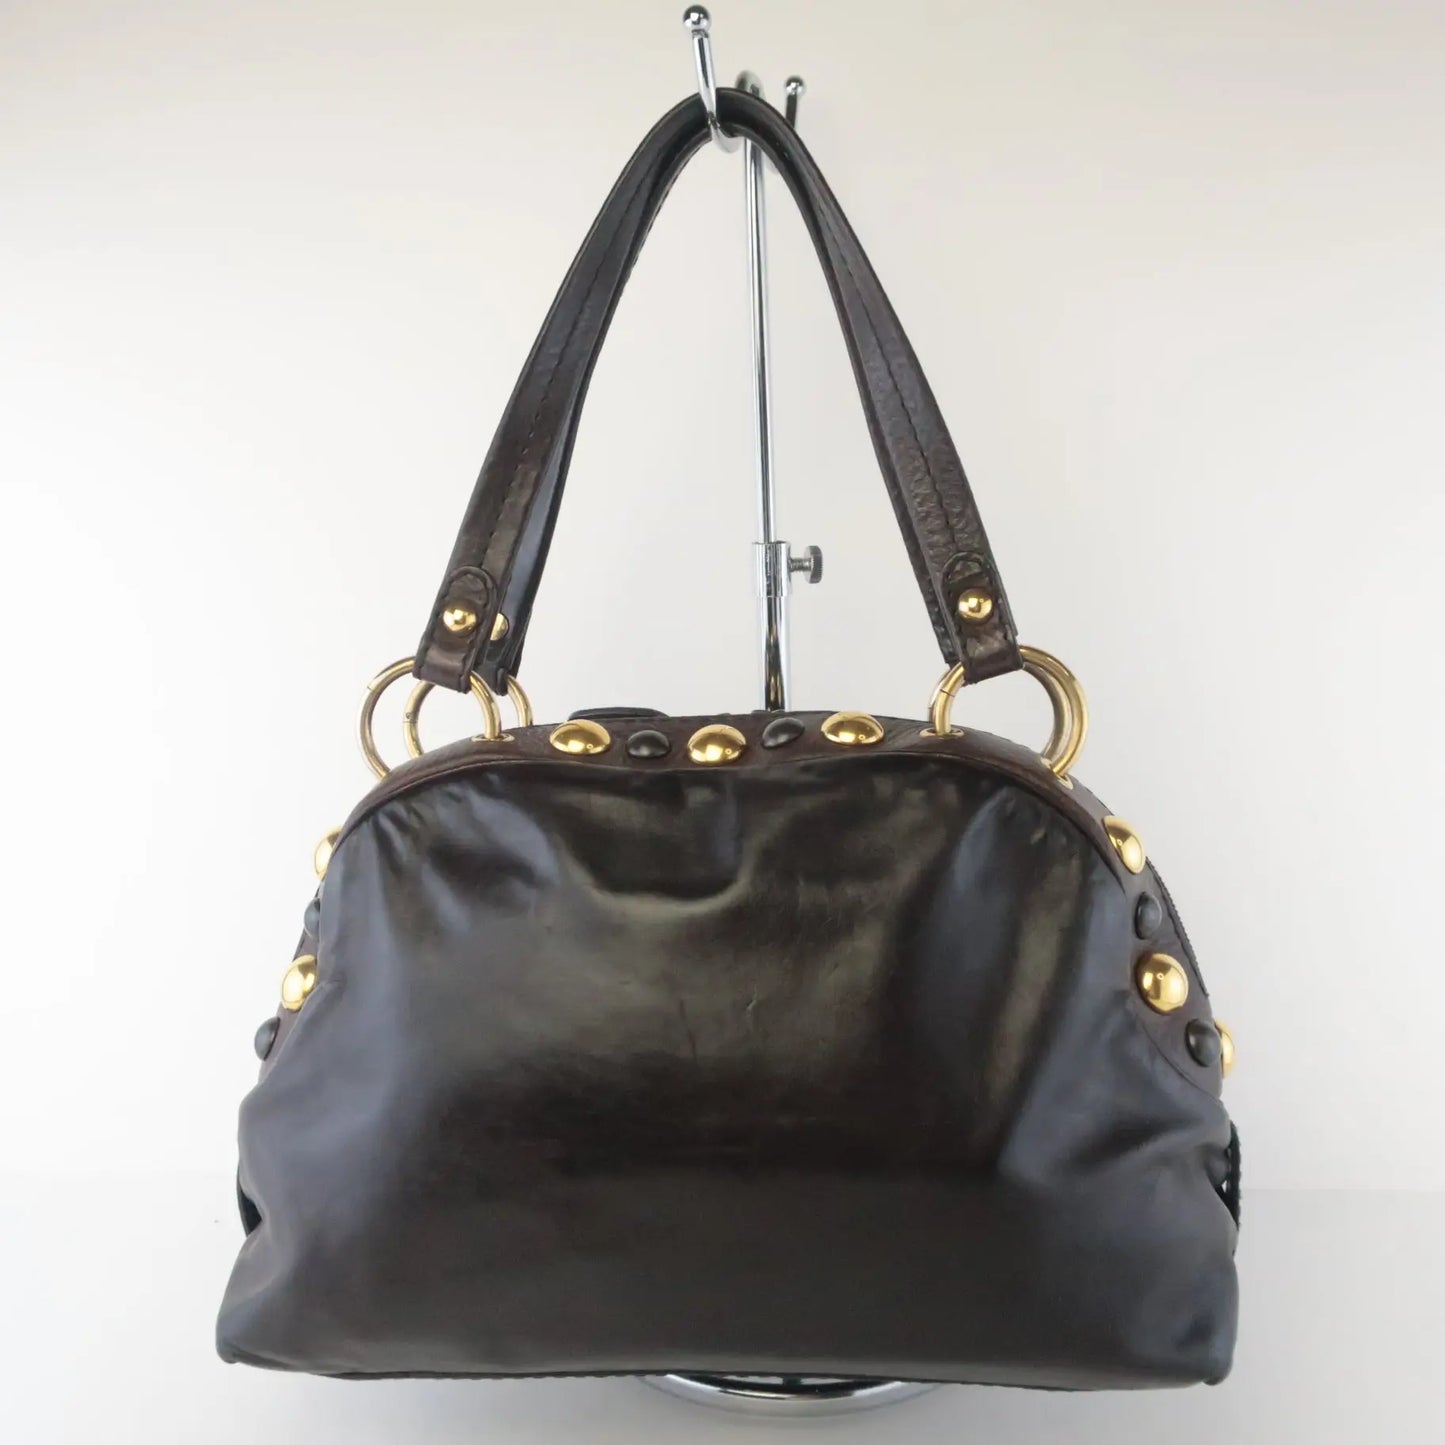 Load image into Gallery viewer, Gucci Gucci Black Leather Babouska Heart Dome Medium Satchel Bag LVBagaholic
